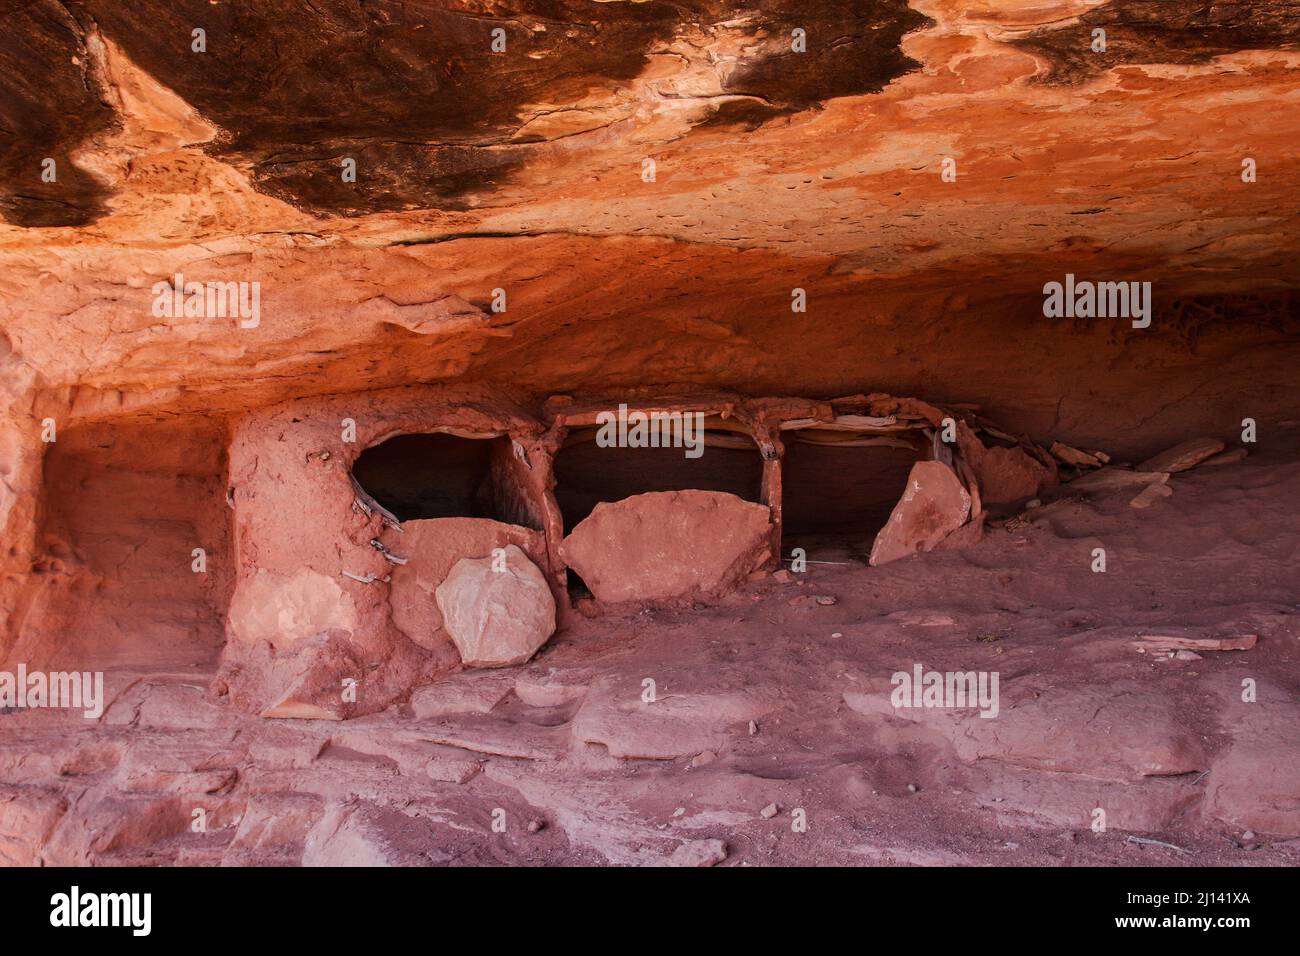 Three ancient Ancestral Pueblan storage granaries in an alcove in the Maze District of Canyonlands National Park in Utah.  These granaries are made of Stock Photo